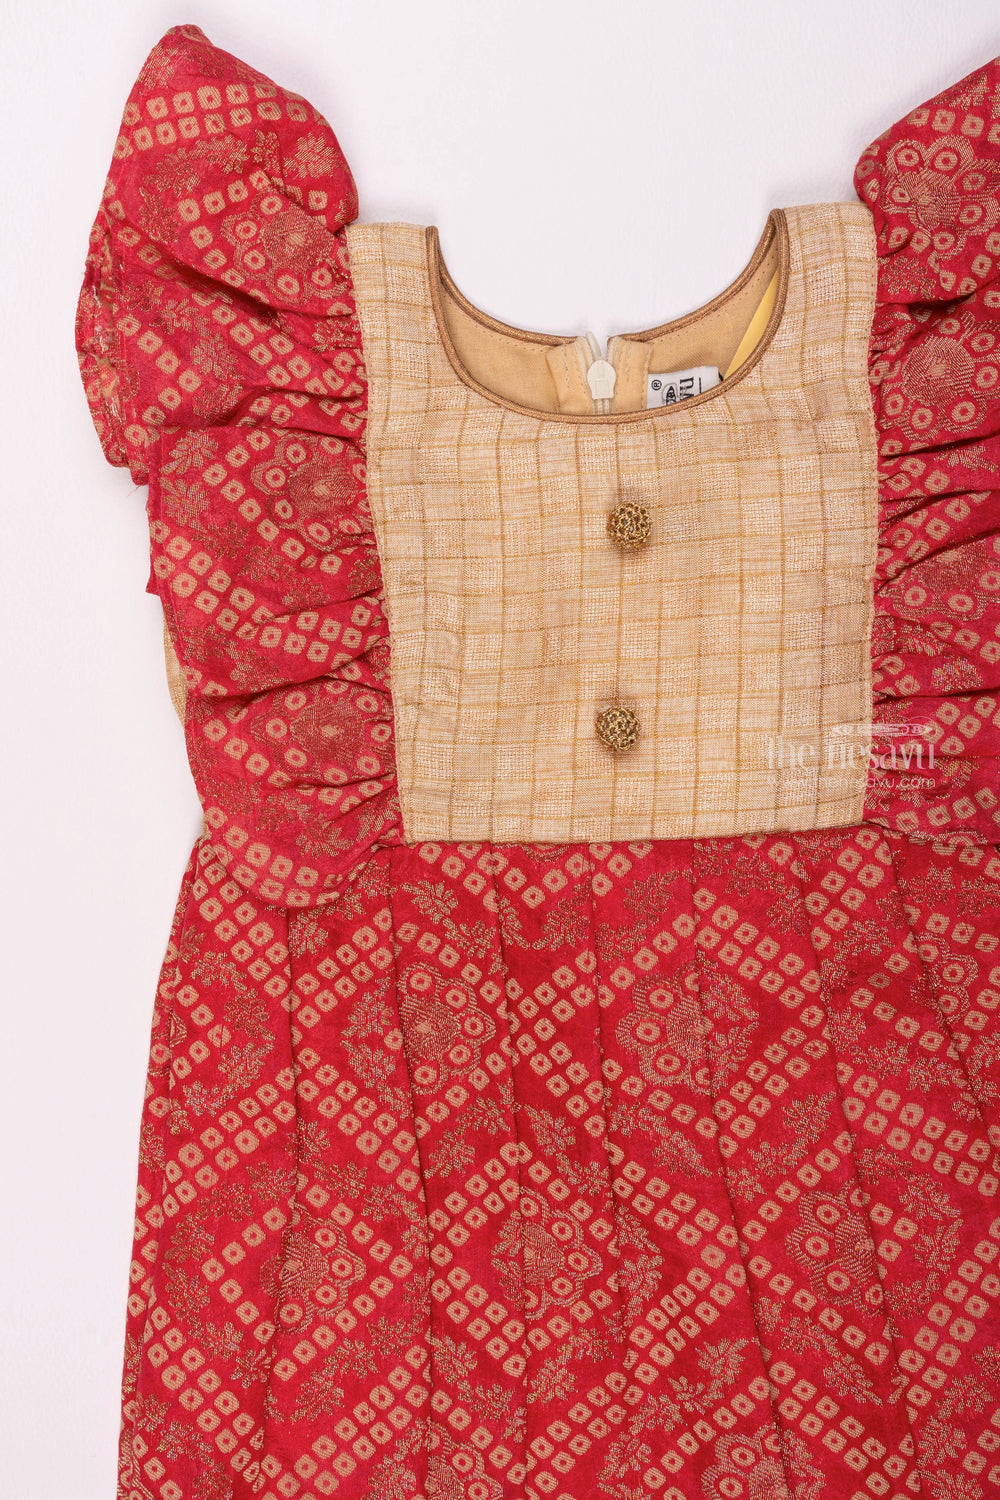 The Nesavu Silk Frock Bold Red Bandhani Artistry Pleated to Perfection with Beige Checkered Yoke Traditional Flair for Young Fashionistas Nesavu Traditional Elegance Redefined | Silk and Pattu Frocks for Girls | The Nesavu